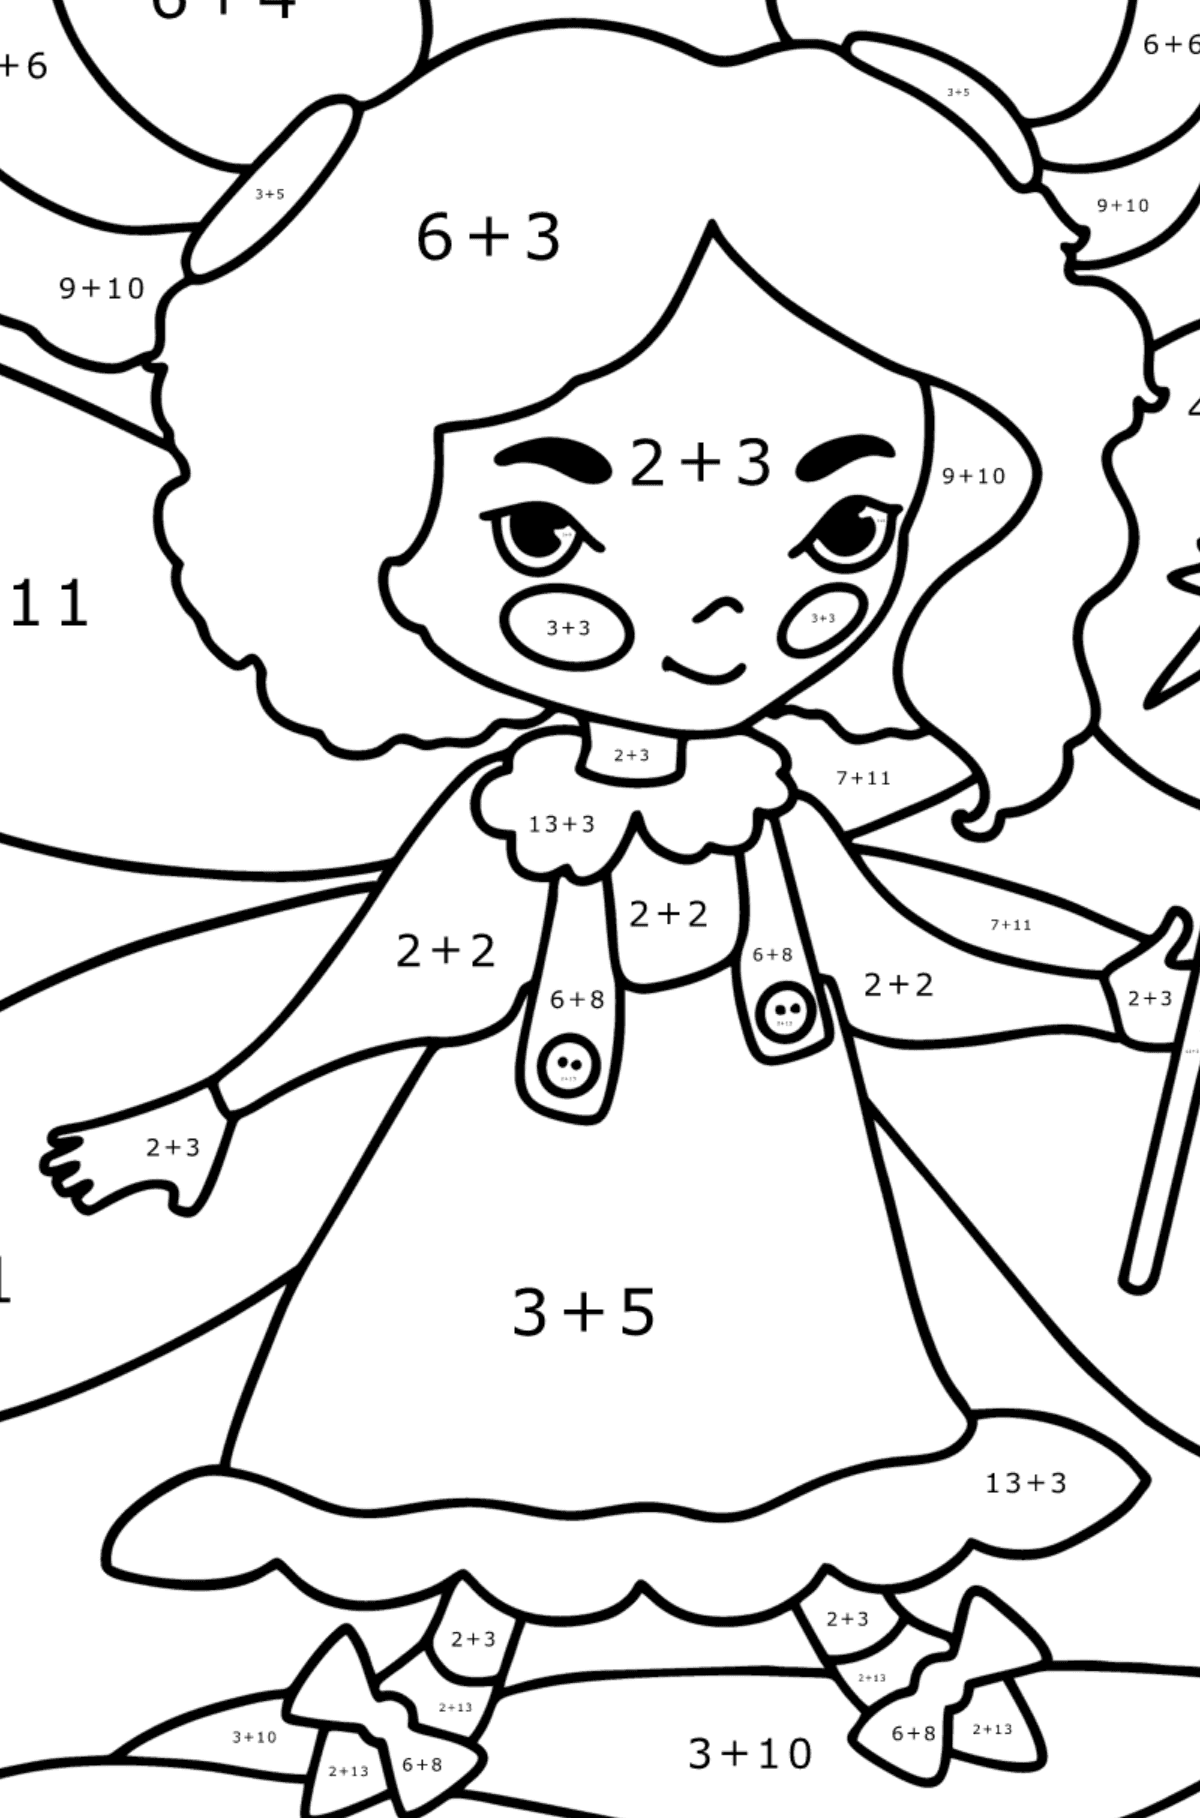 Fairy with a magic wand coloring page - Math Coloring - Addition for Kids